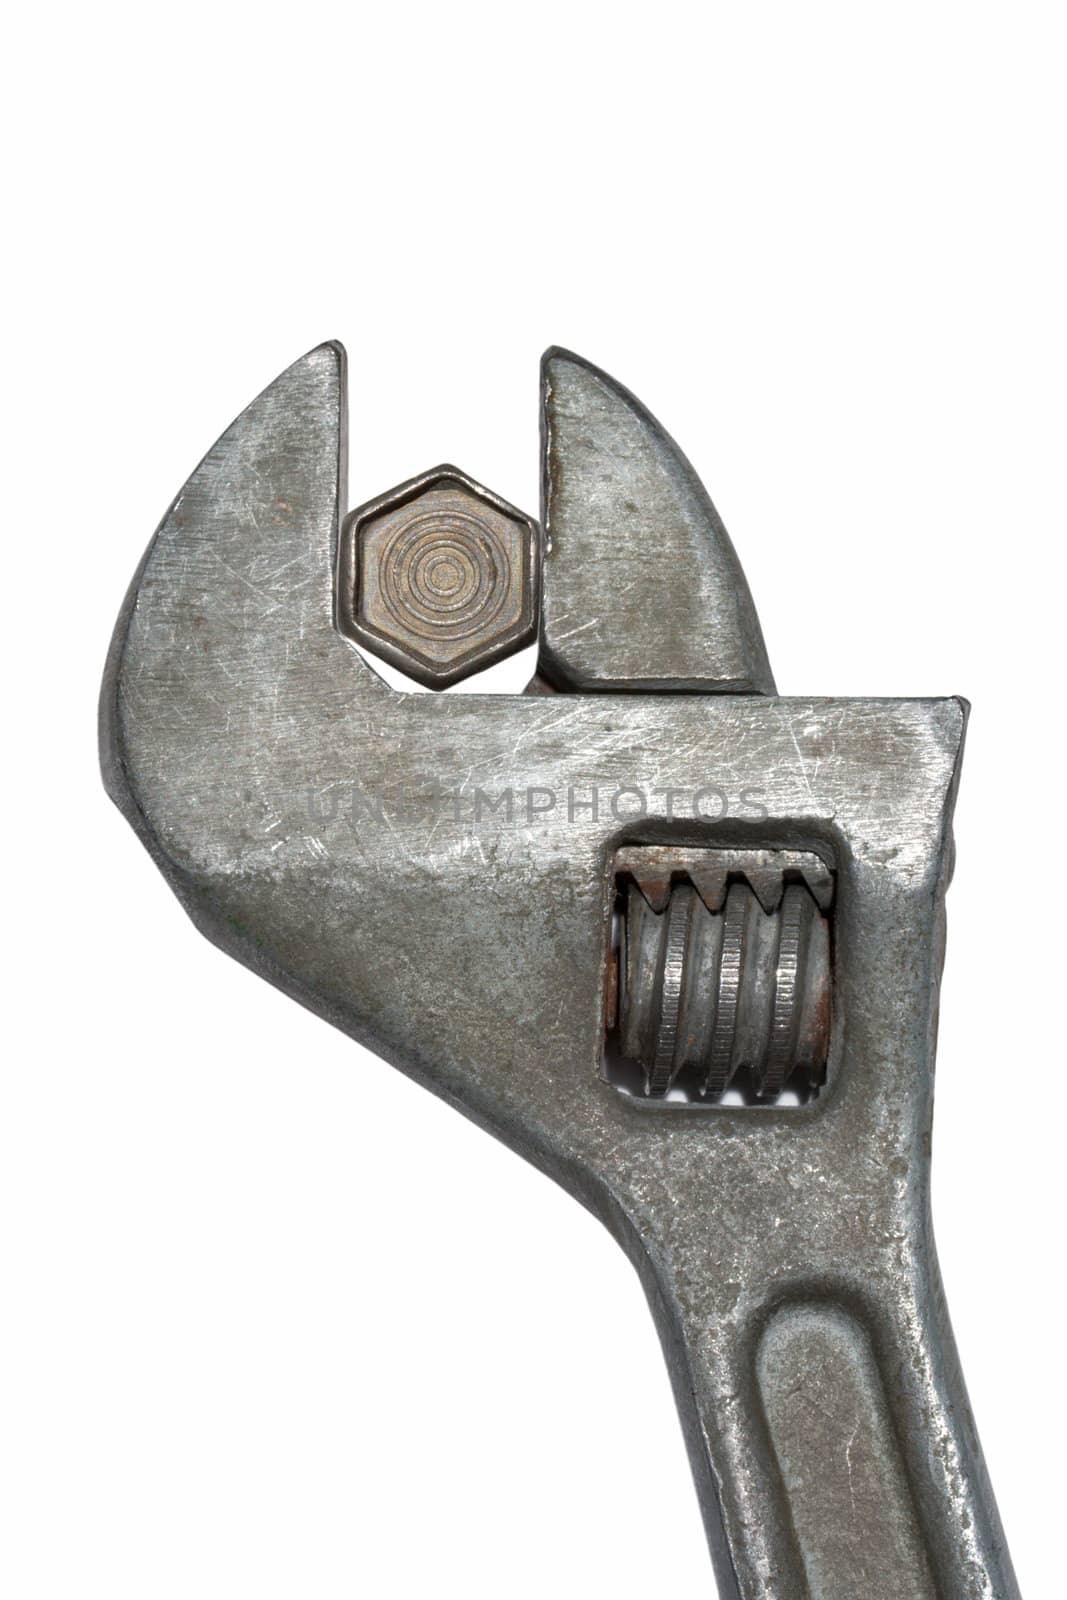 Old adjustable spanner with bolt by dimol